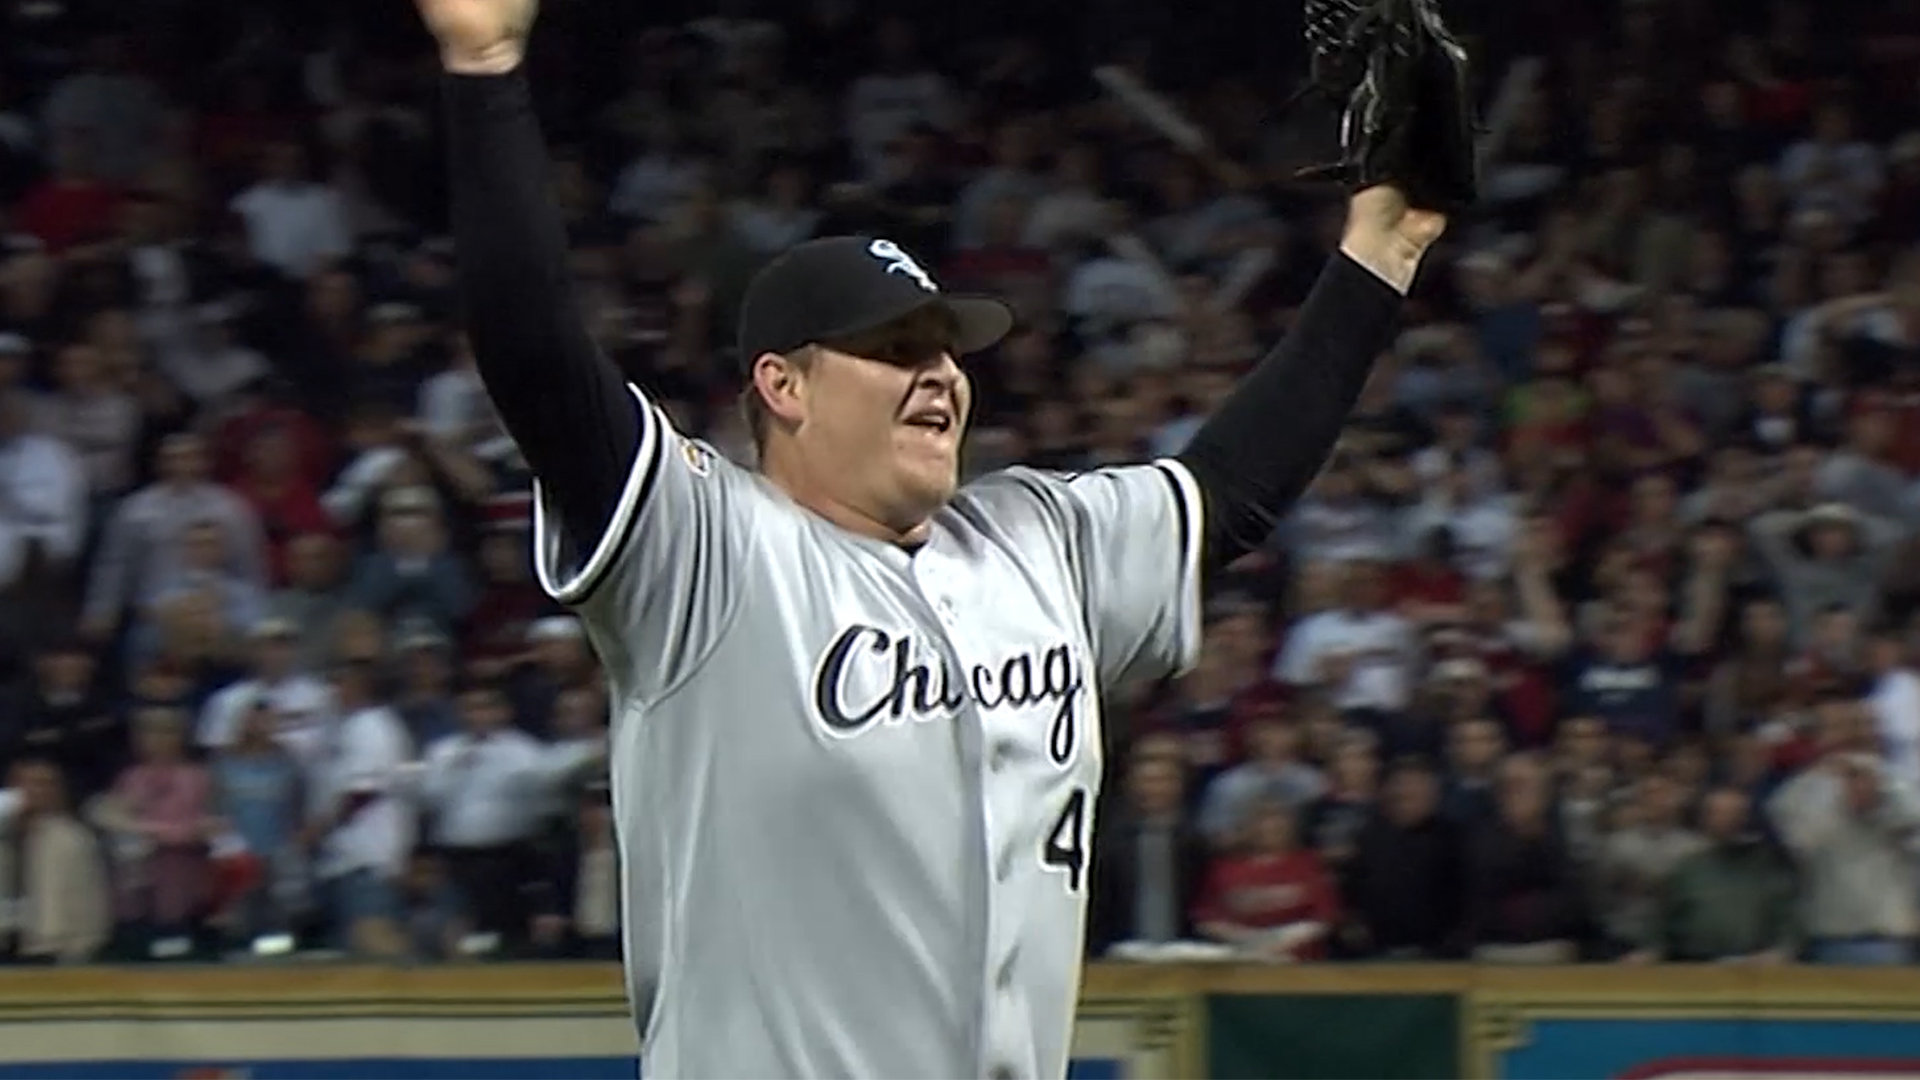 White Sox 2005 Rewind: 15 best moments from the World Series run